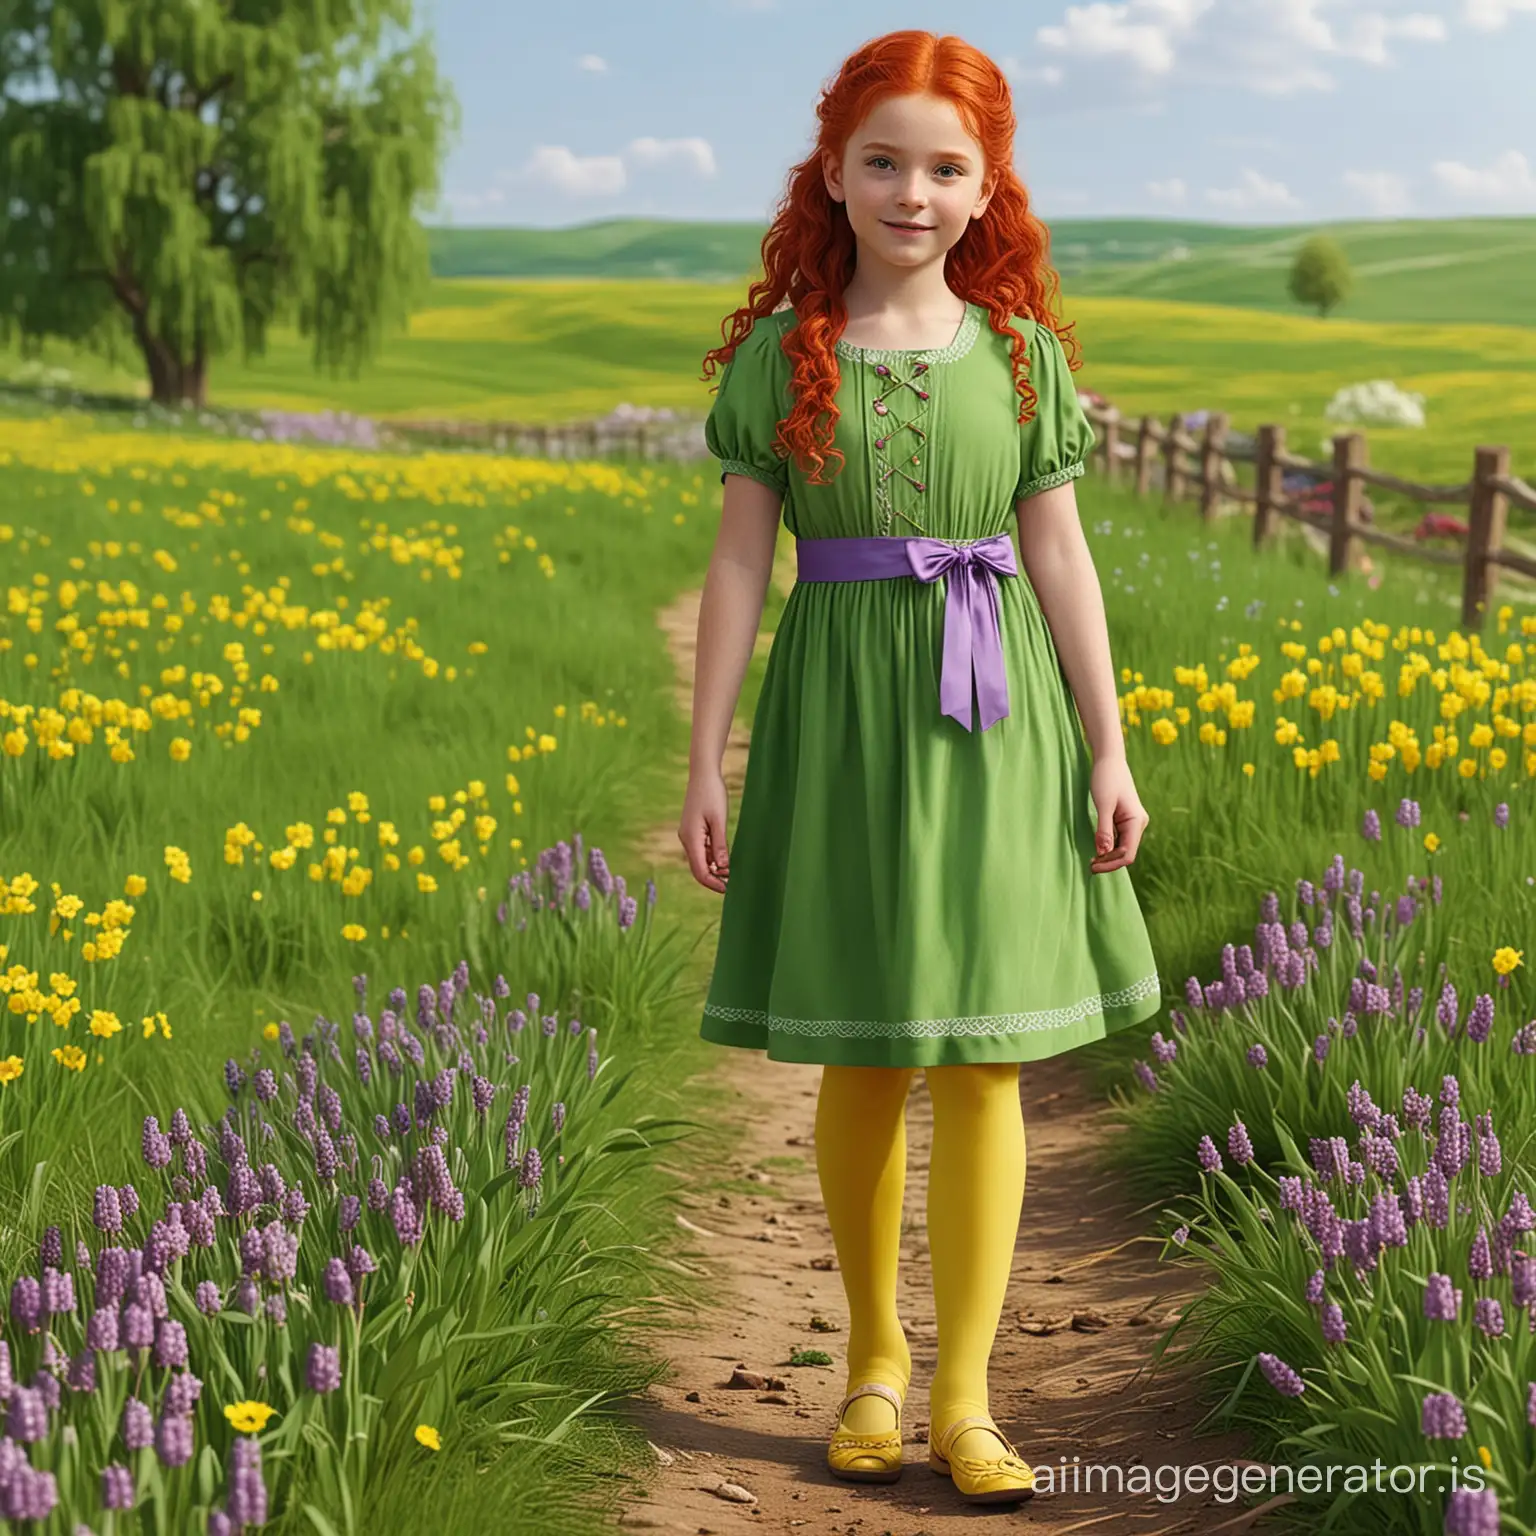 Enchanting-Spring-Landscape-with-a-RedHaired-Girl-in-Green-Dress